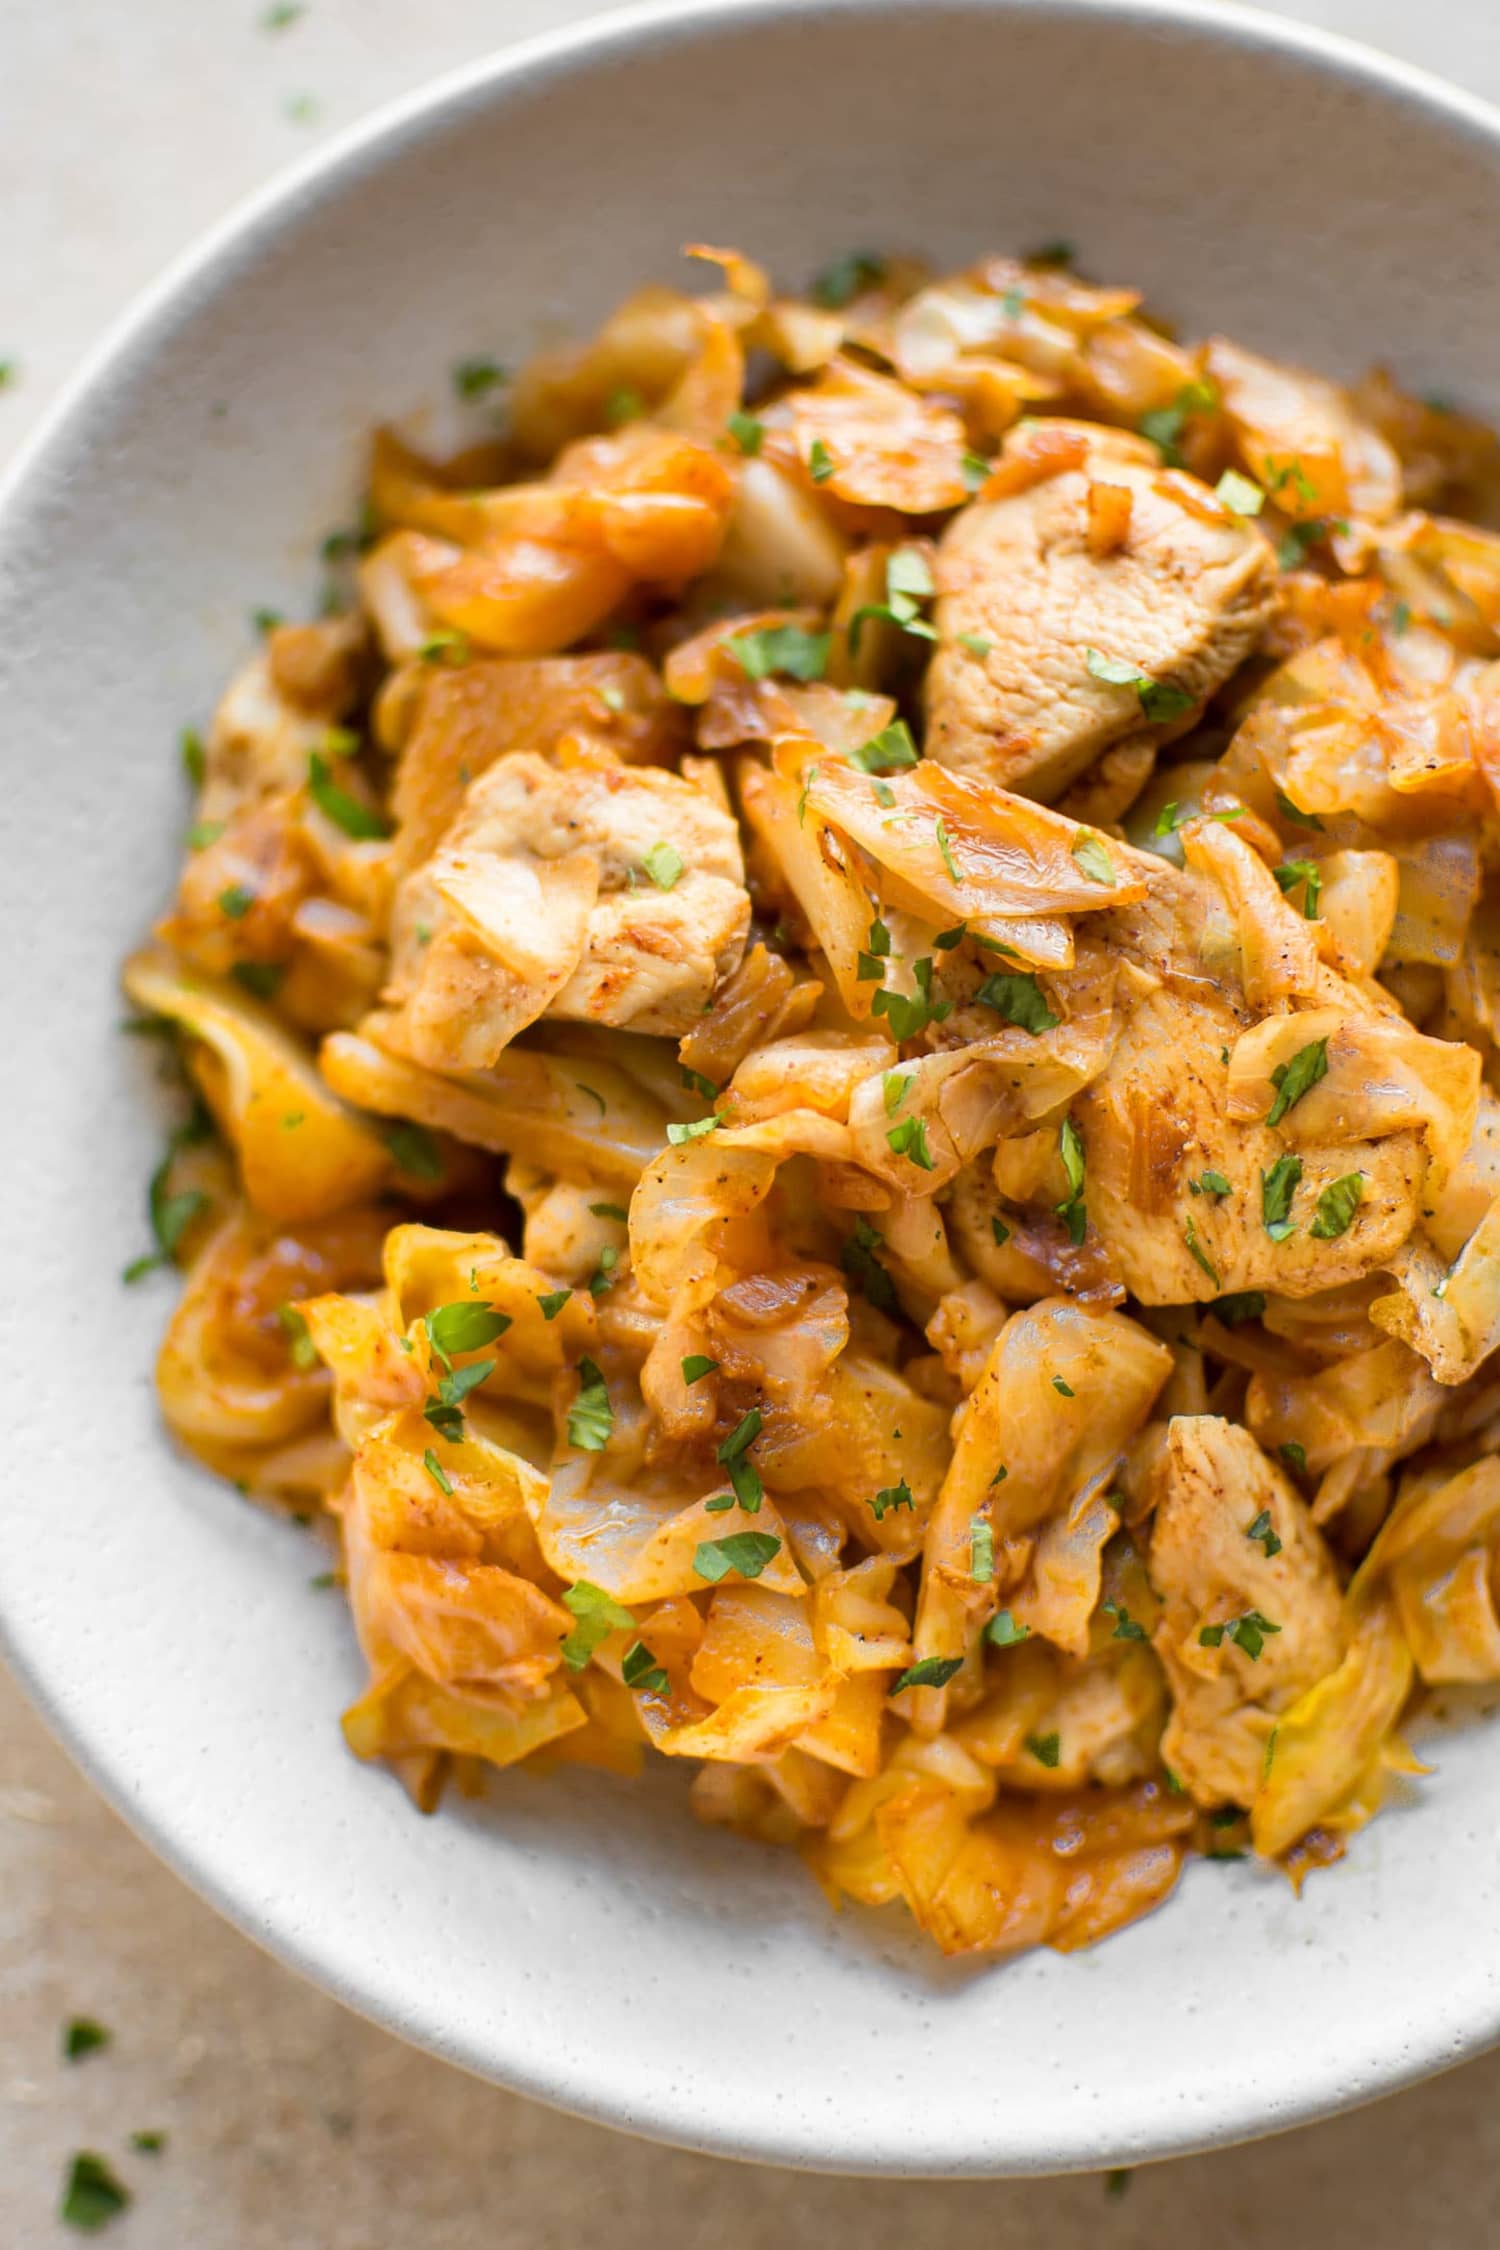 Easy Chicken and Cabbage Stir-Fry Is Your Answer to “What Should I Make for Dinner Tonight?”